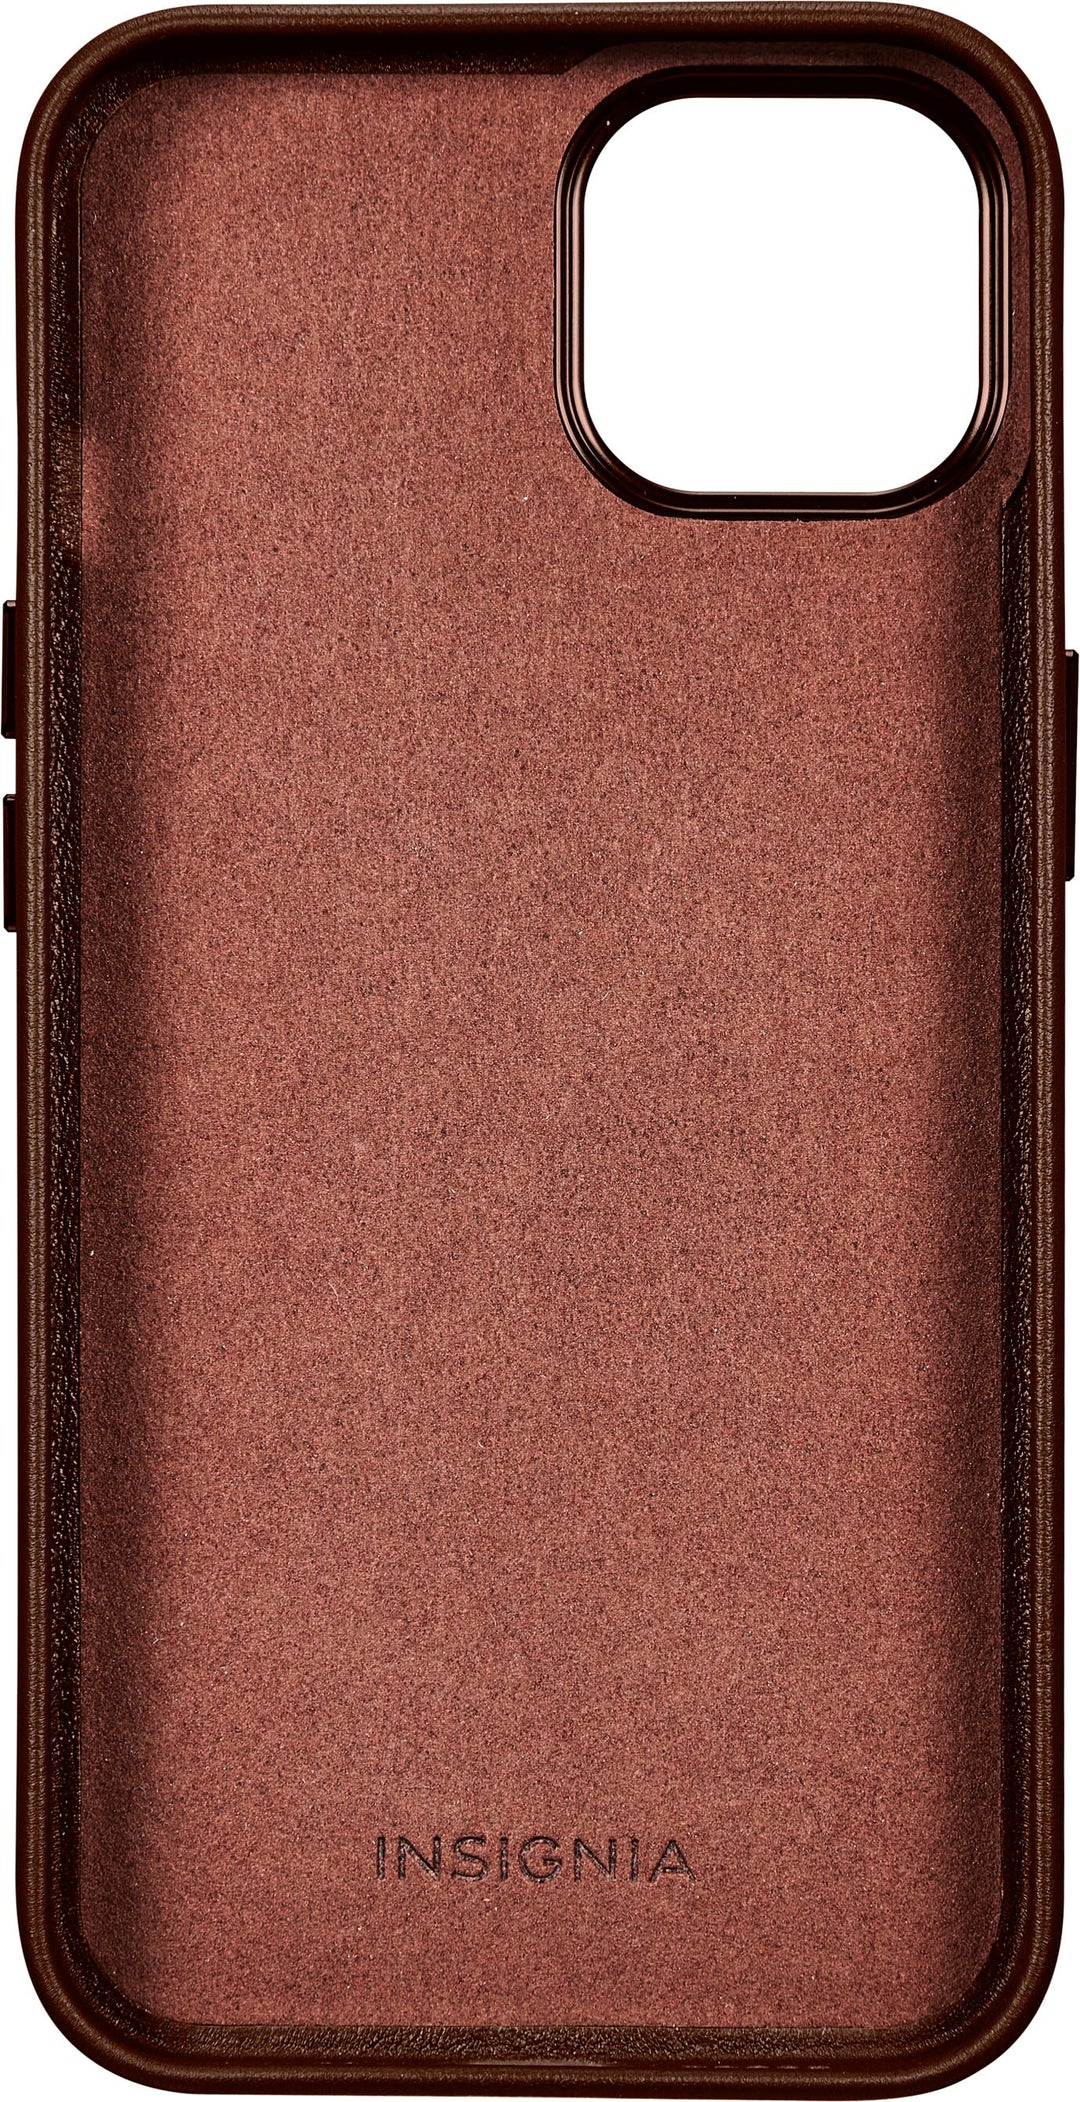 Insignia™ - Leather Wallet Case for iPhone 14 and iPhone 13 - Bourbon_4